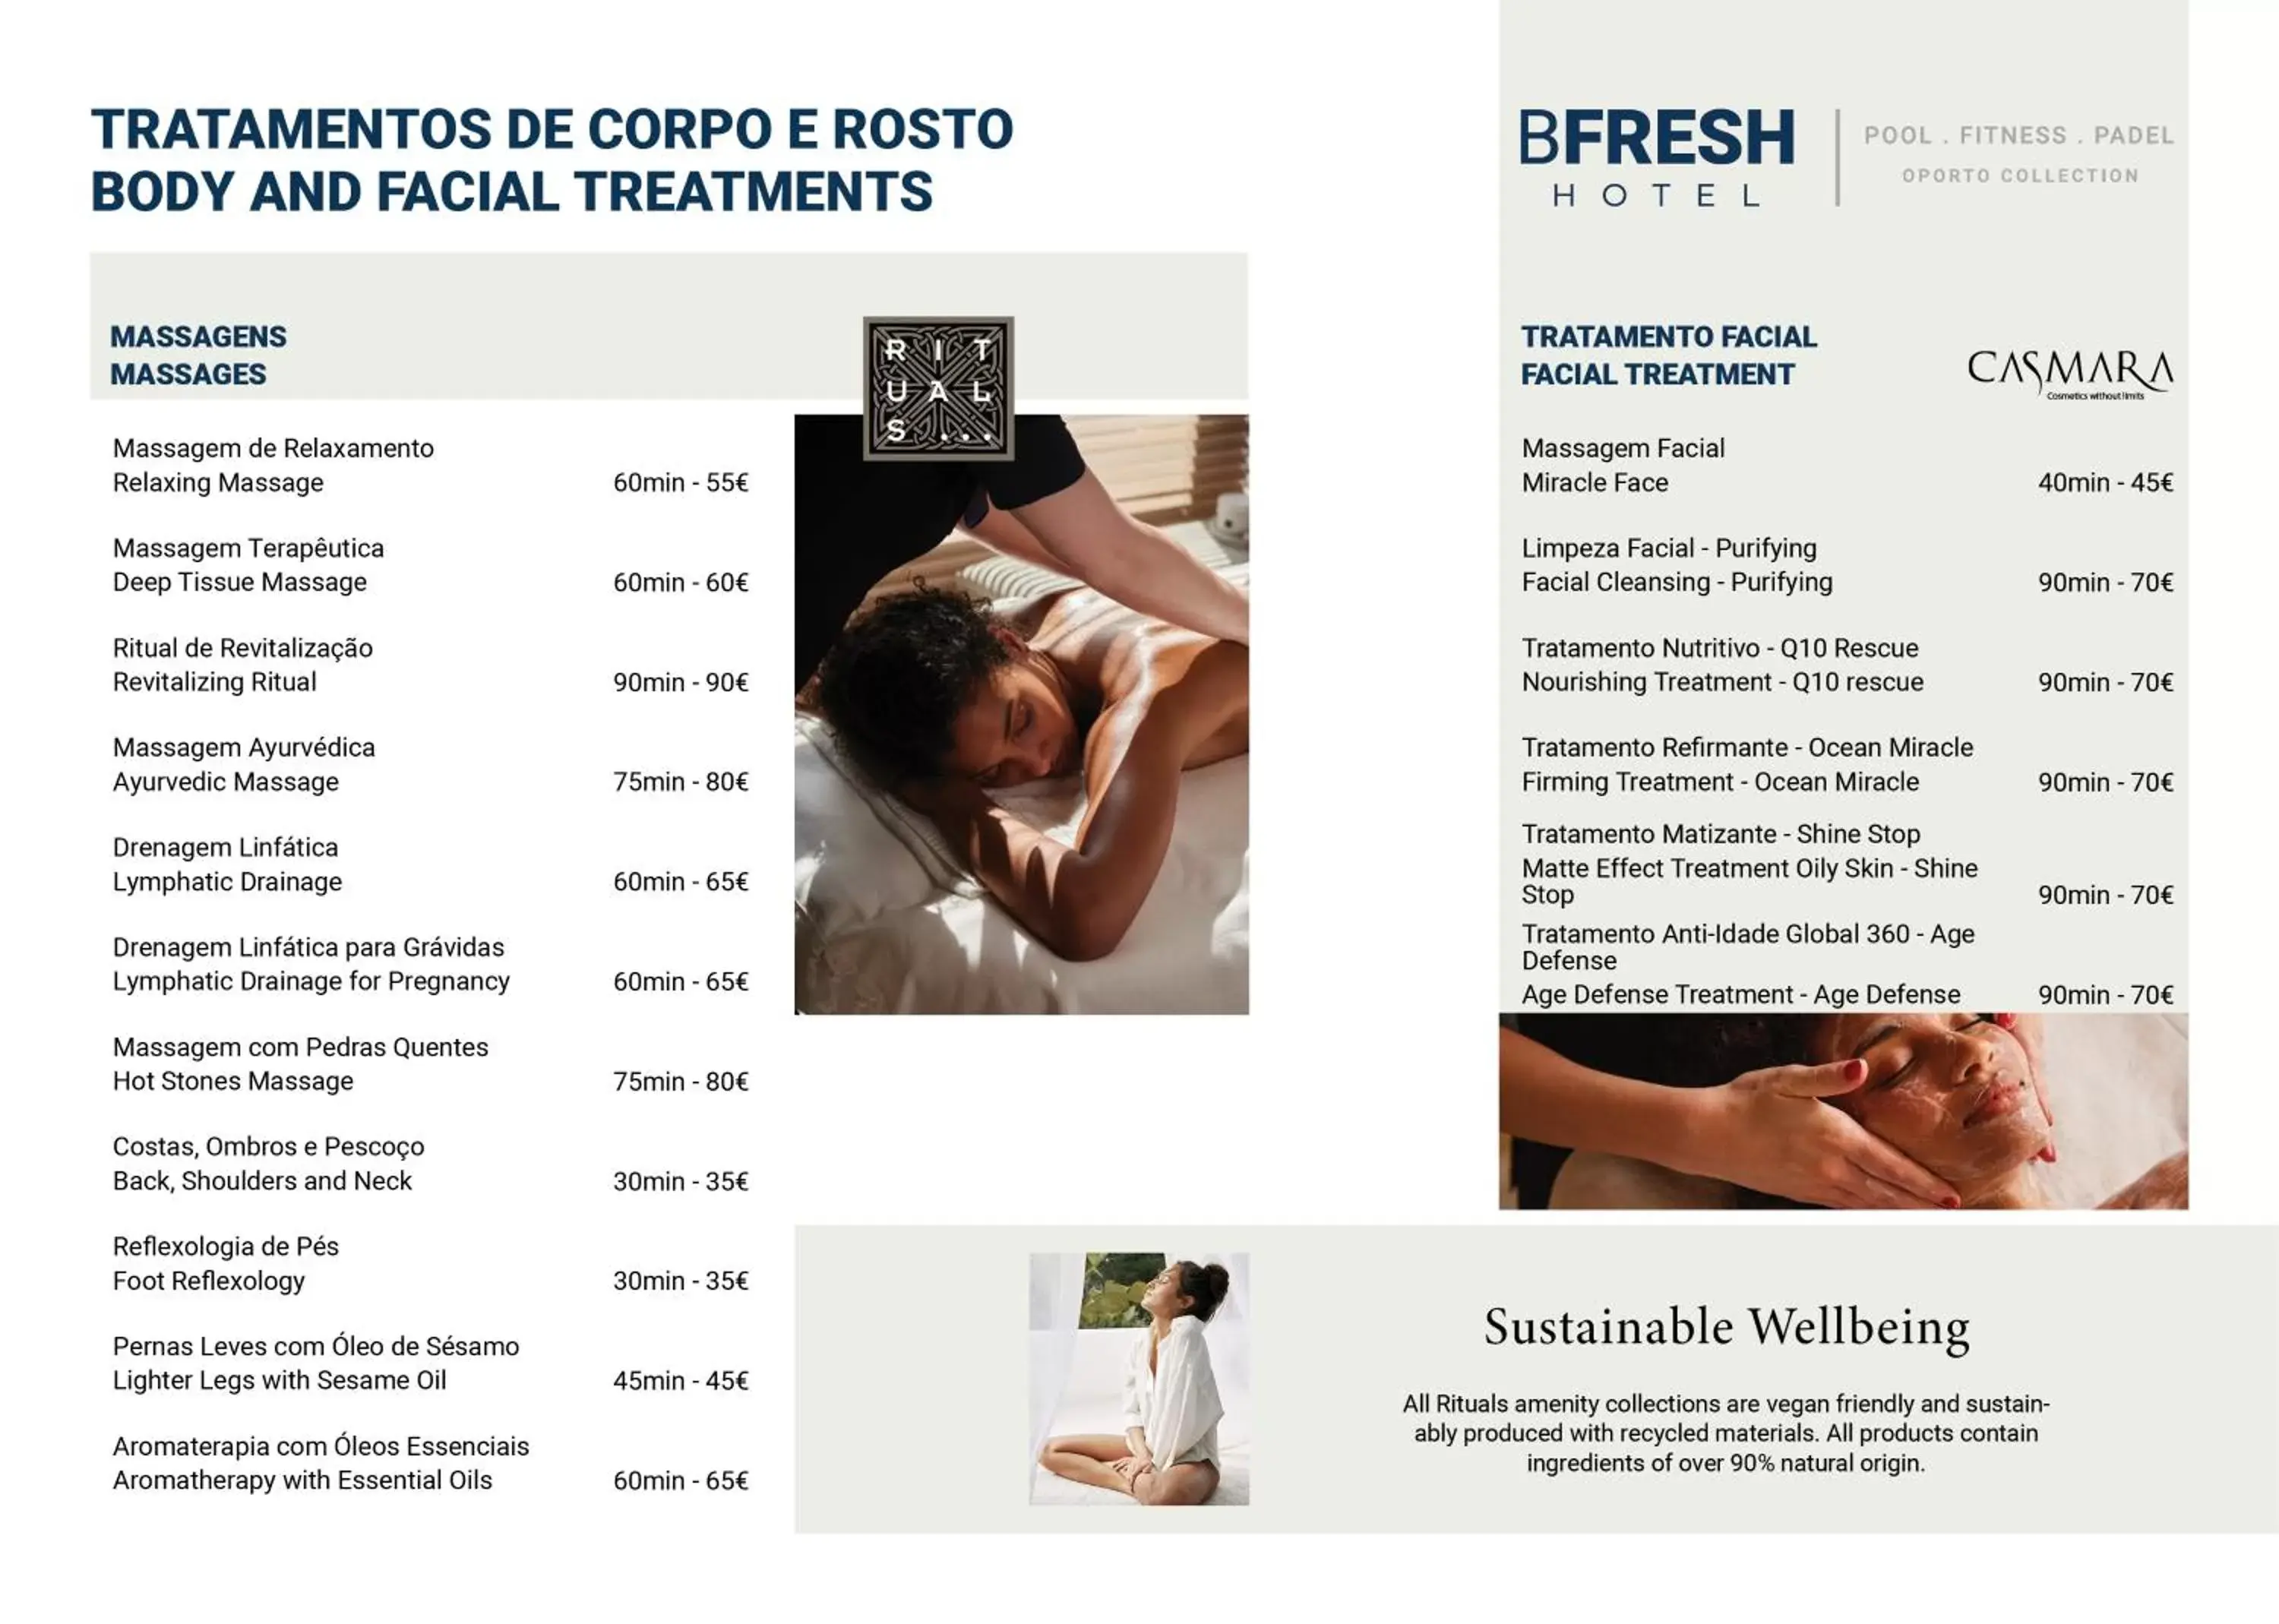 Massage, Logo/Certificate/Sign/Award in BFRESH Hotel - Padel, Pool & Fitness - Adults Only - Private Parking